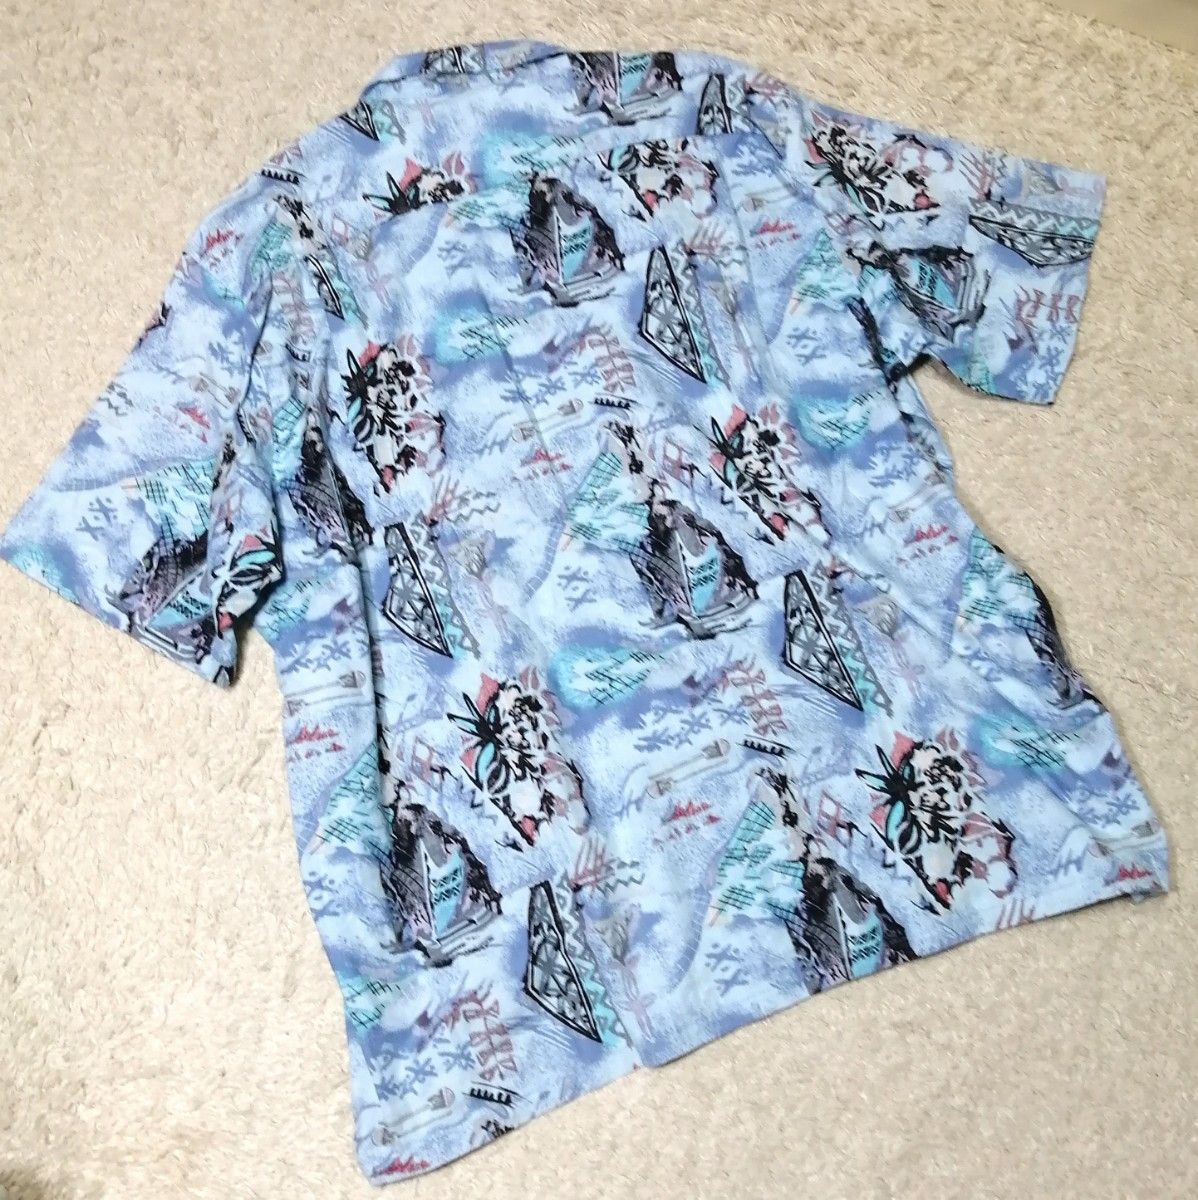 ★BaReFoot in Paradise★アロハシャツ 希少 超ビッグ 2XL 夏 半袖シャツ 総柄